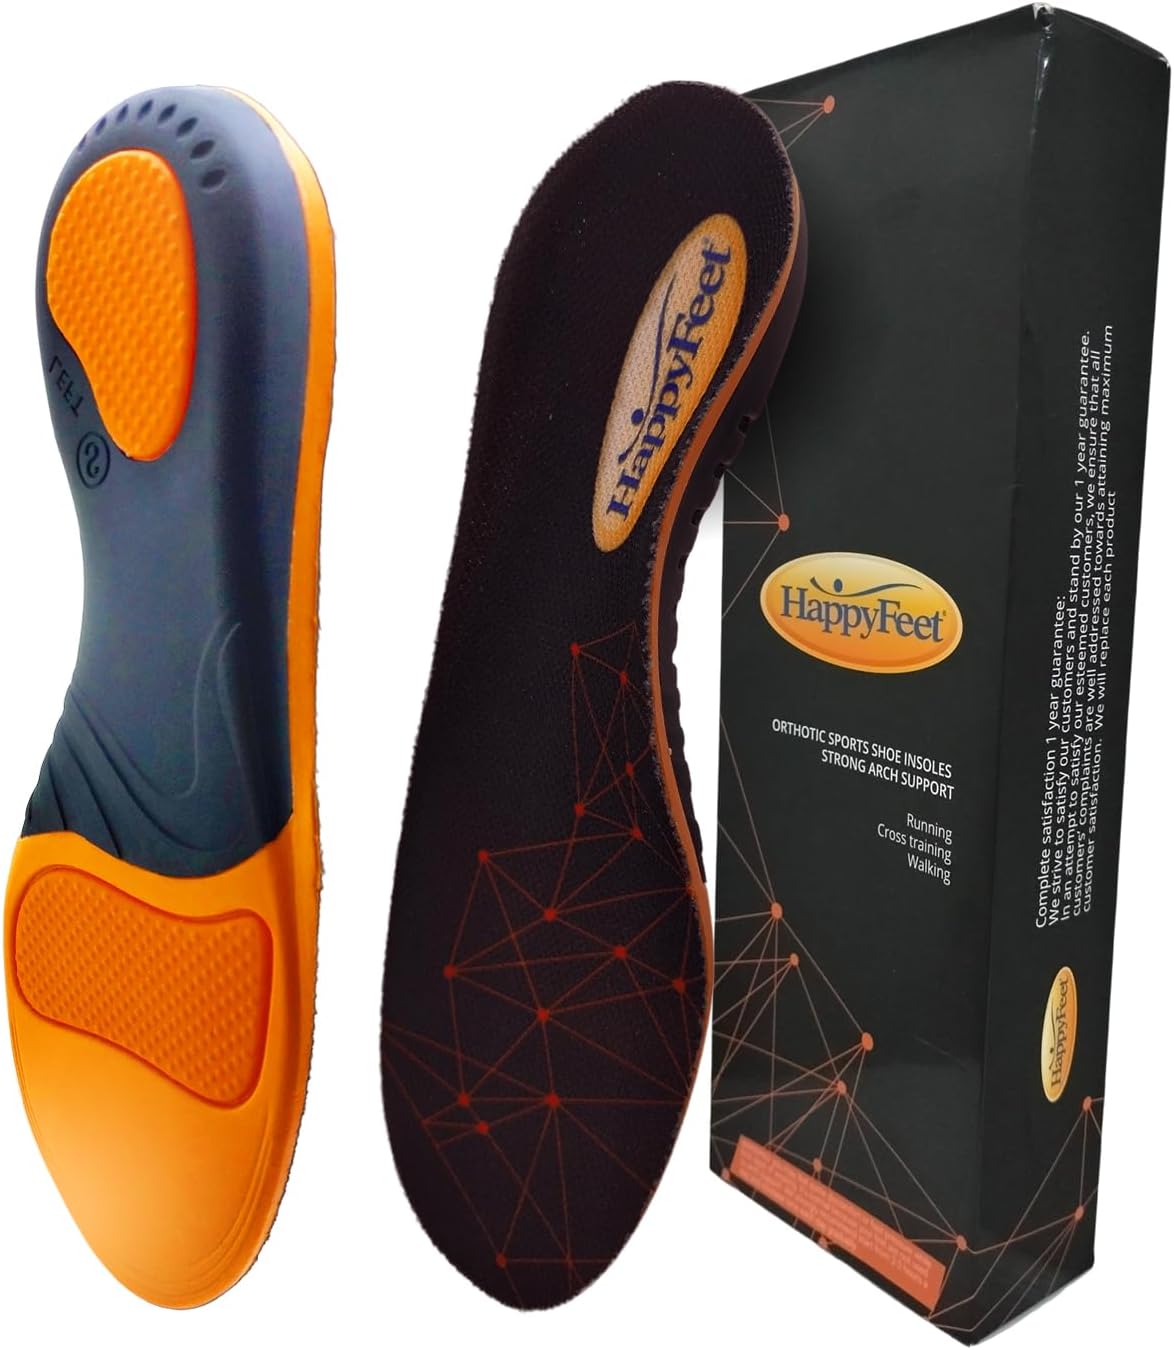 Happy Feet Arch Support Insoles - Plantar Fasciitis Feet Insoles - Shock Absorbing, Anti-Fatigue, Foot Pain, High Arch Support Insoles for Men Women, Multiple Size Trim to Fit (XL)